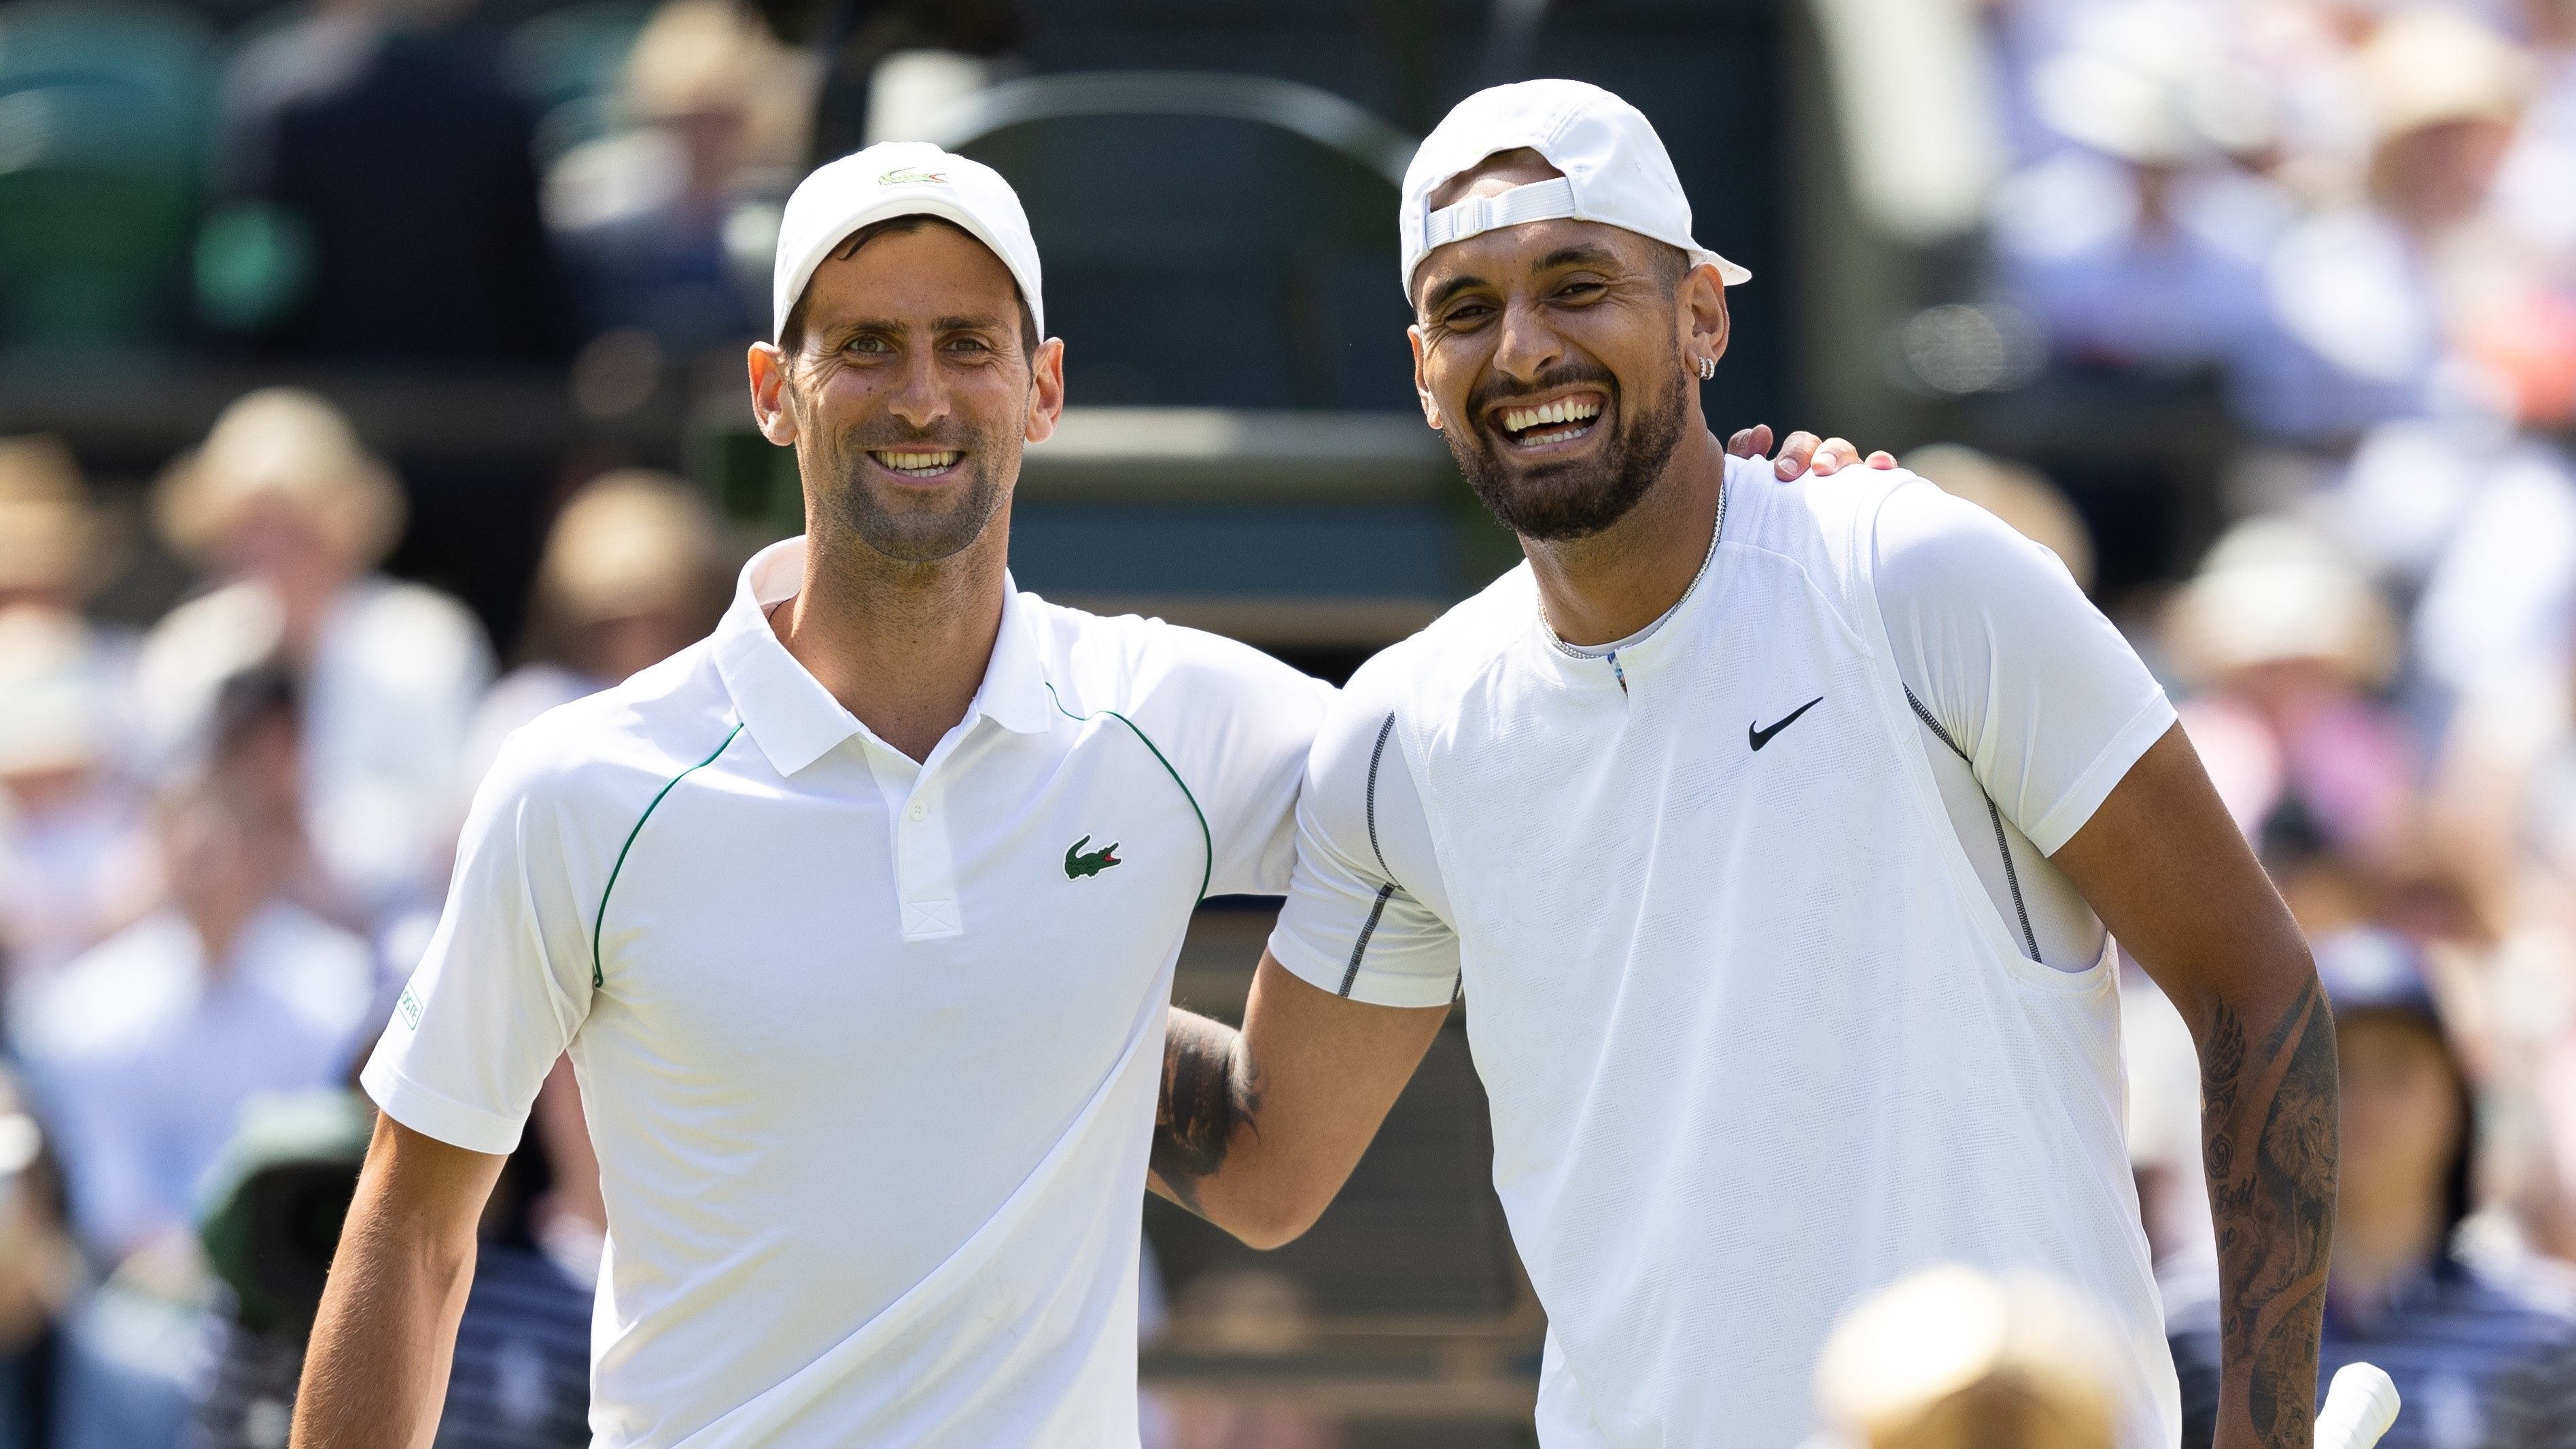 Nick Kyrgios injury fears allayed as exhibition match with Novak Djokovic confirmed